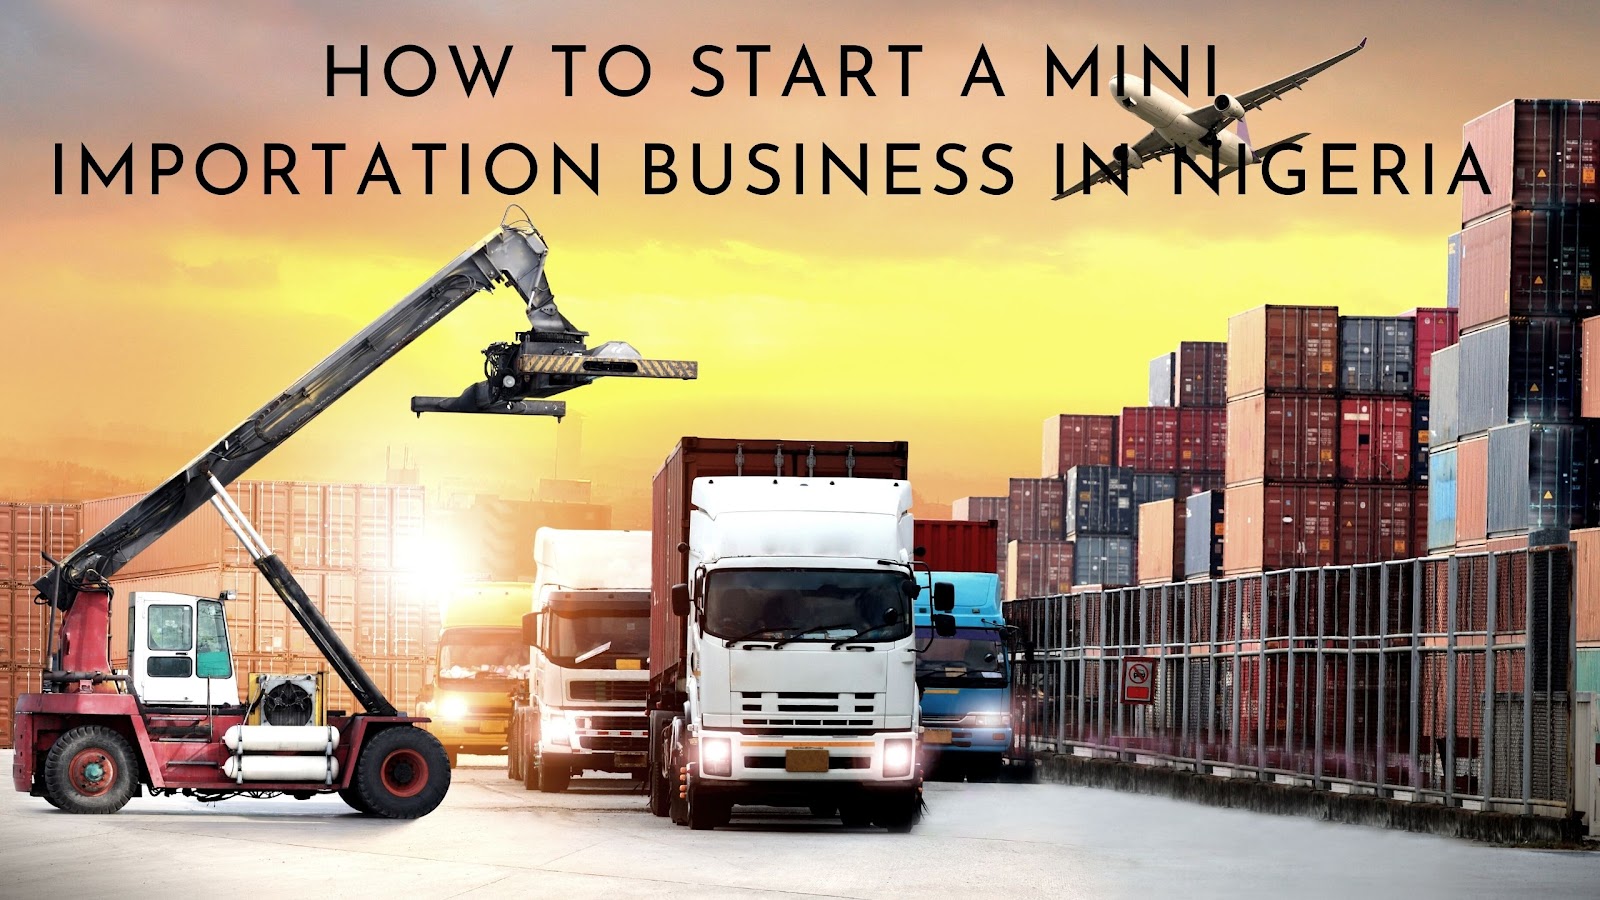 How to Start a Mini Importation Business in Nigeria in 6 steps